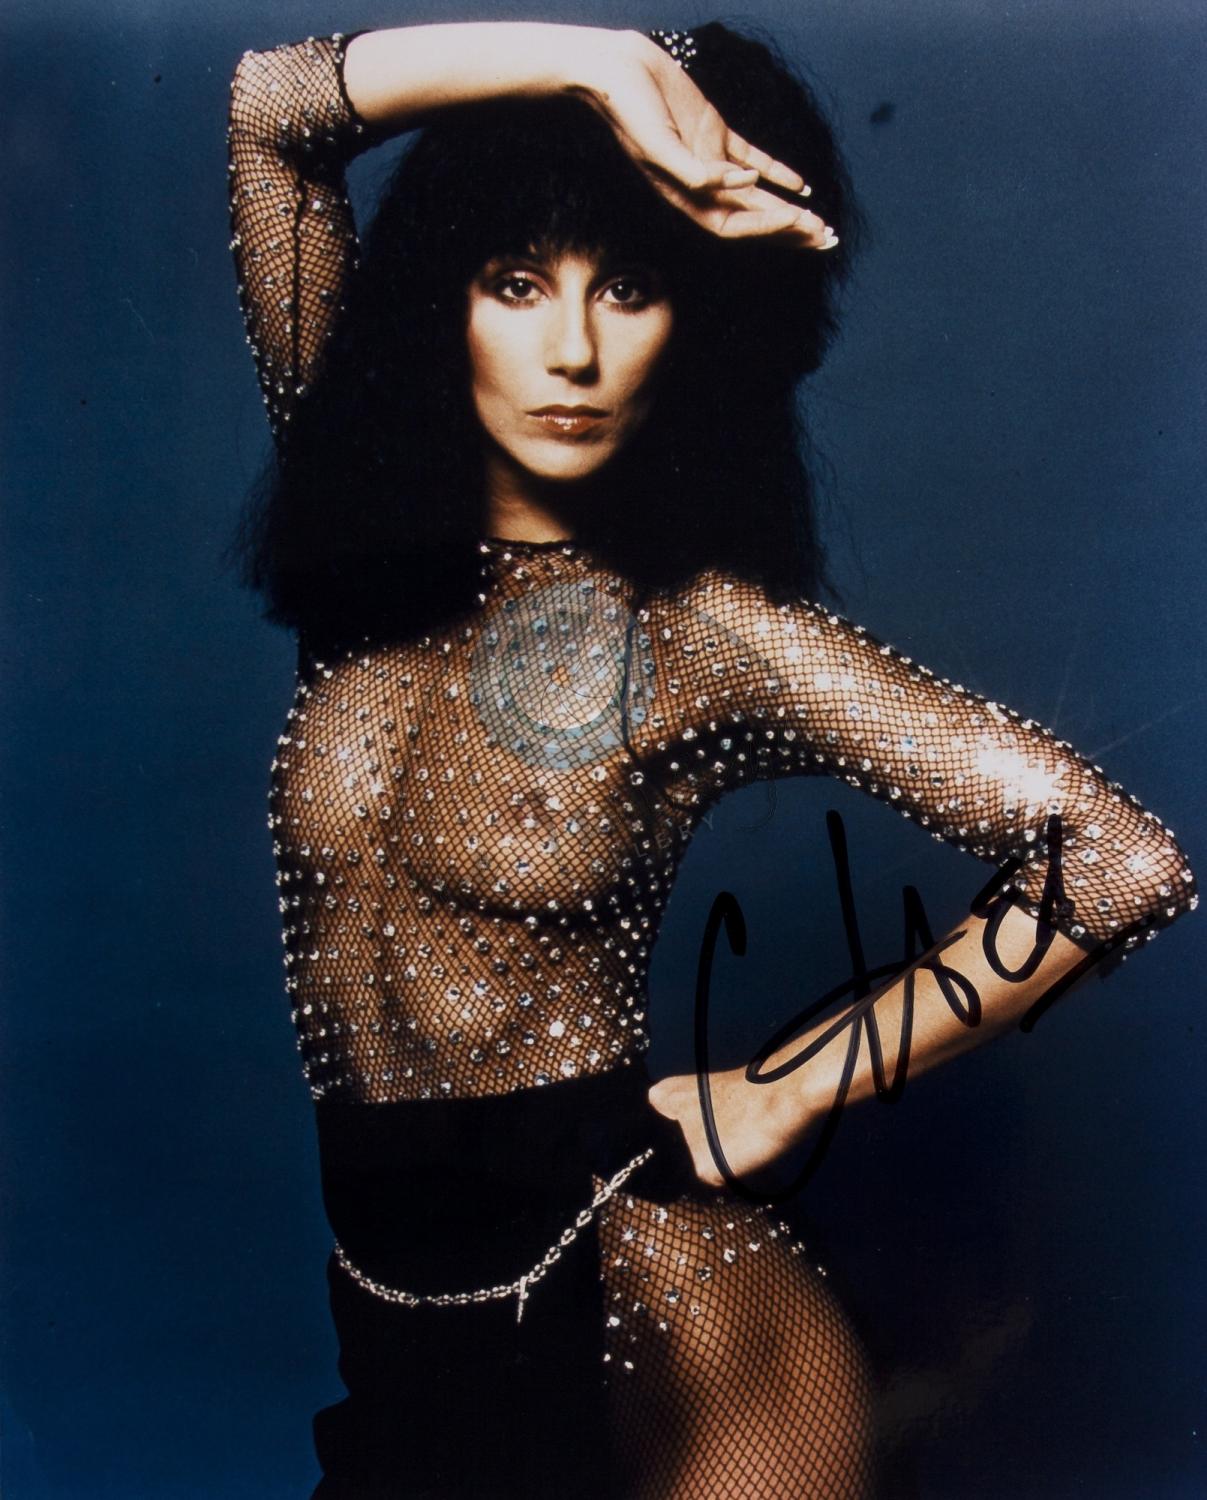 Cher sexiest